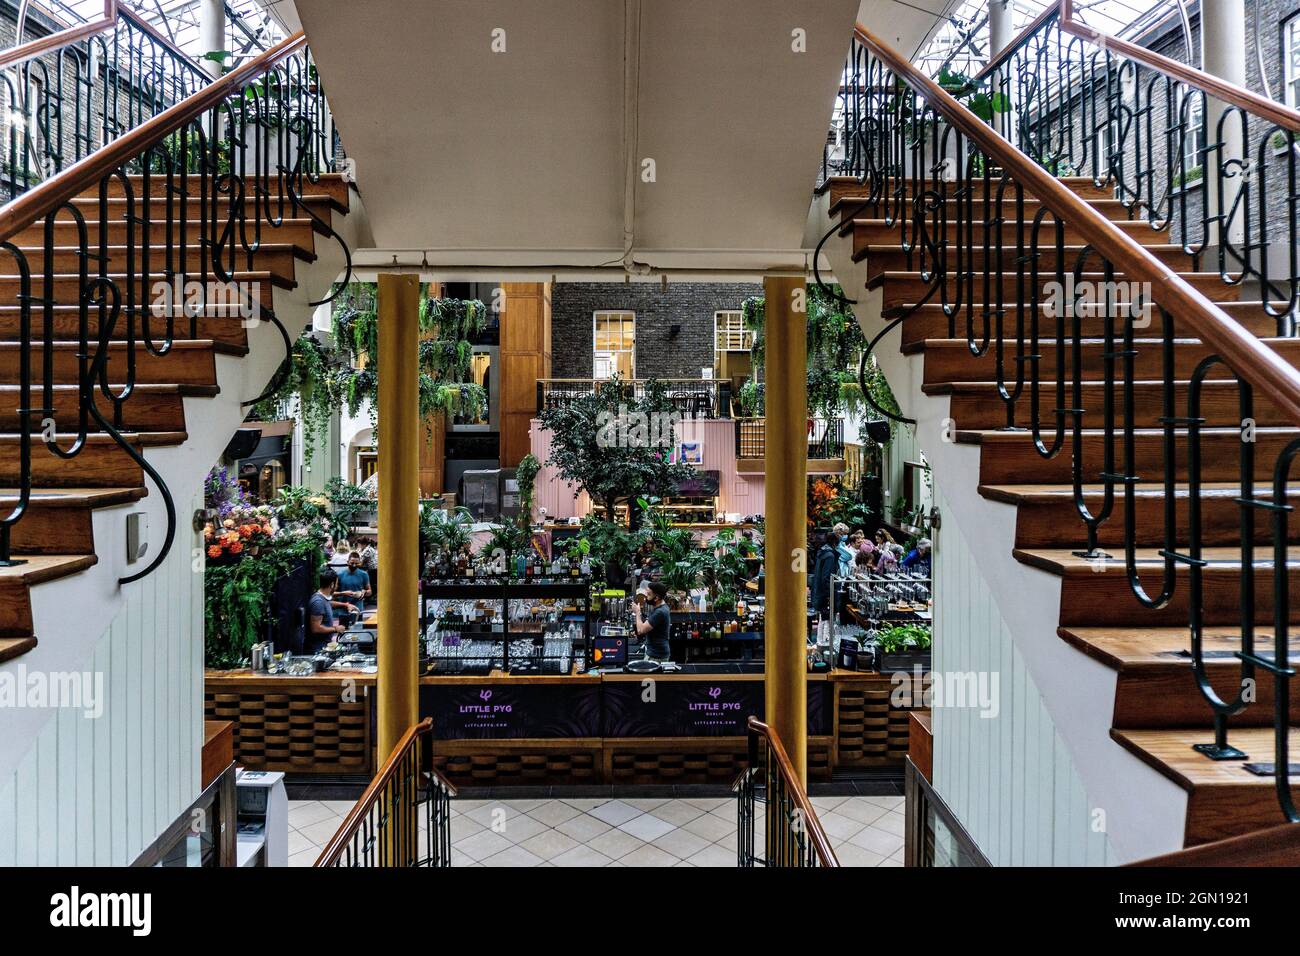 The interior of Powerscourt Centre in Sth William Street, Dublin, Ireland. It is a small speciality shopping area in an old Georgian house. Stock Photo